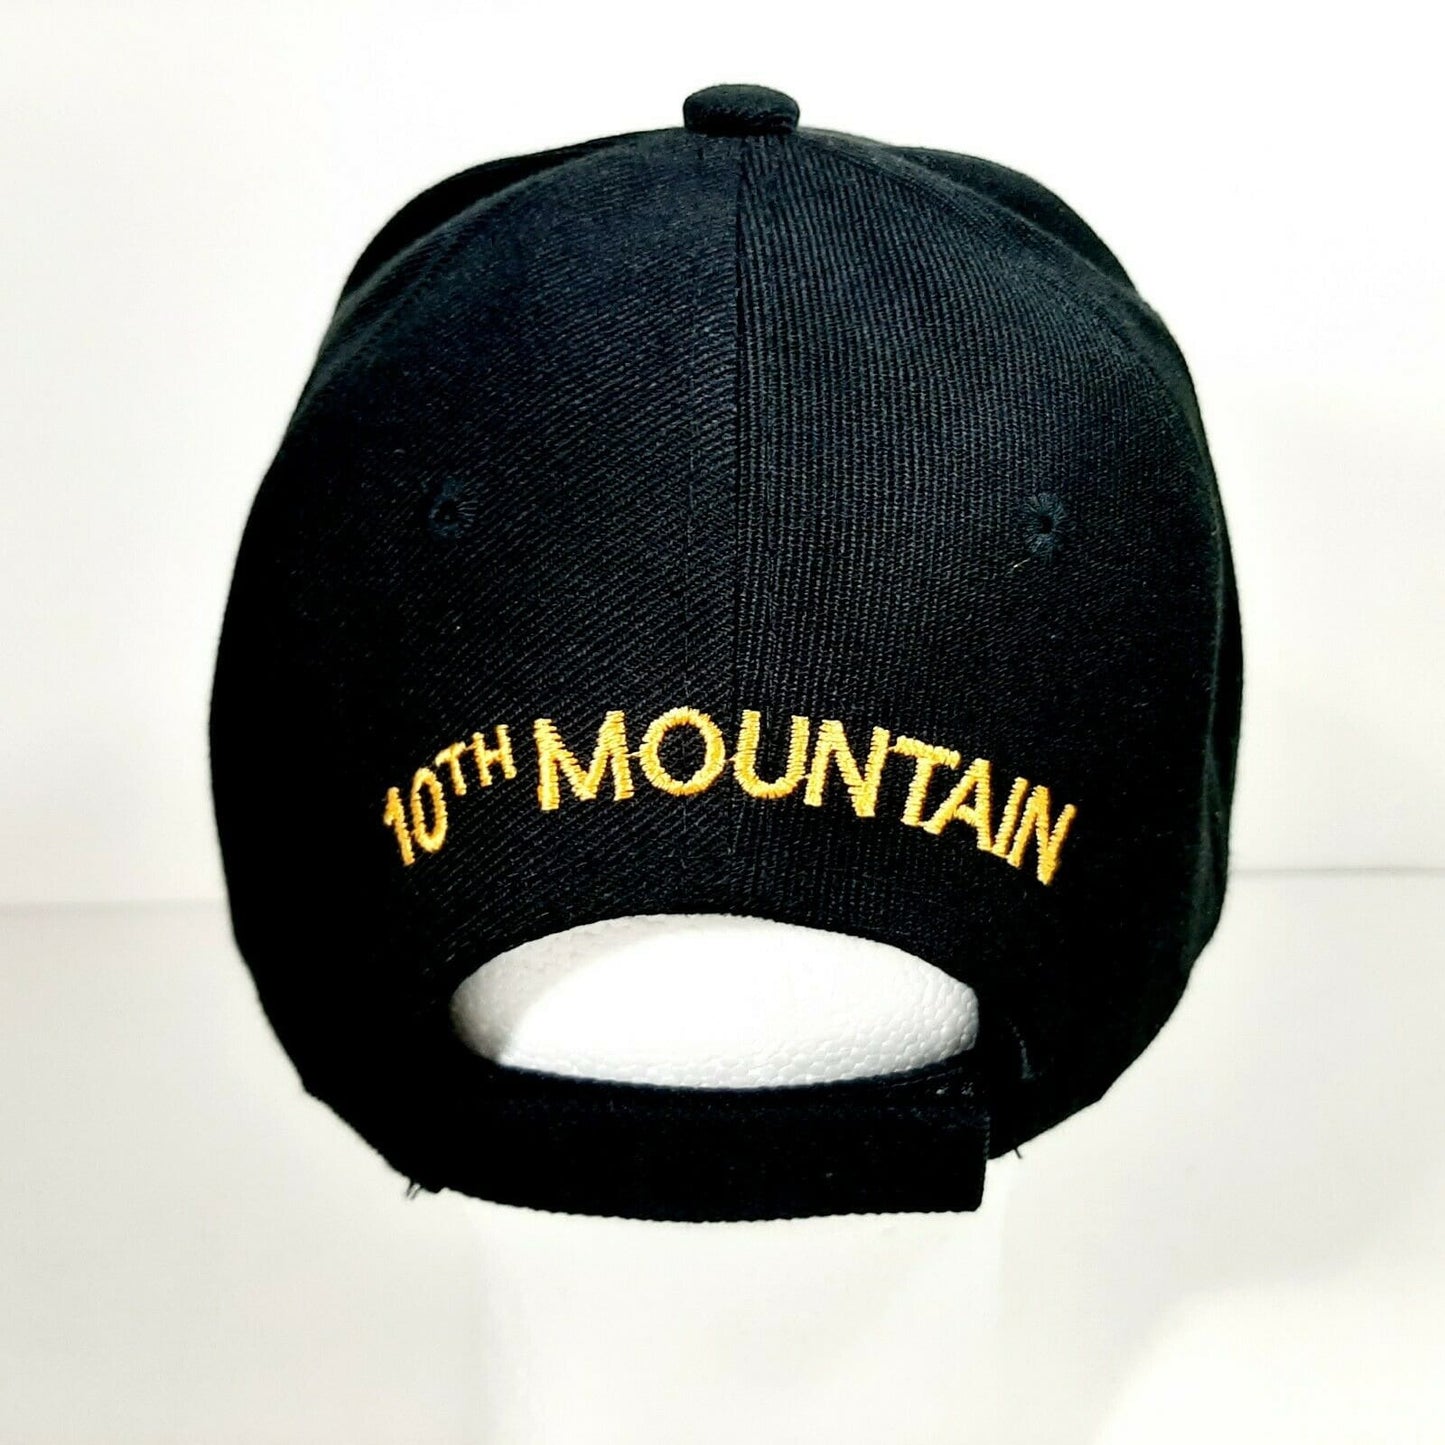 US Army 10th Mountain Division Men's Ball Cap Hat Black Acrylic Embroidered